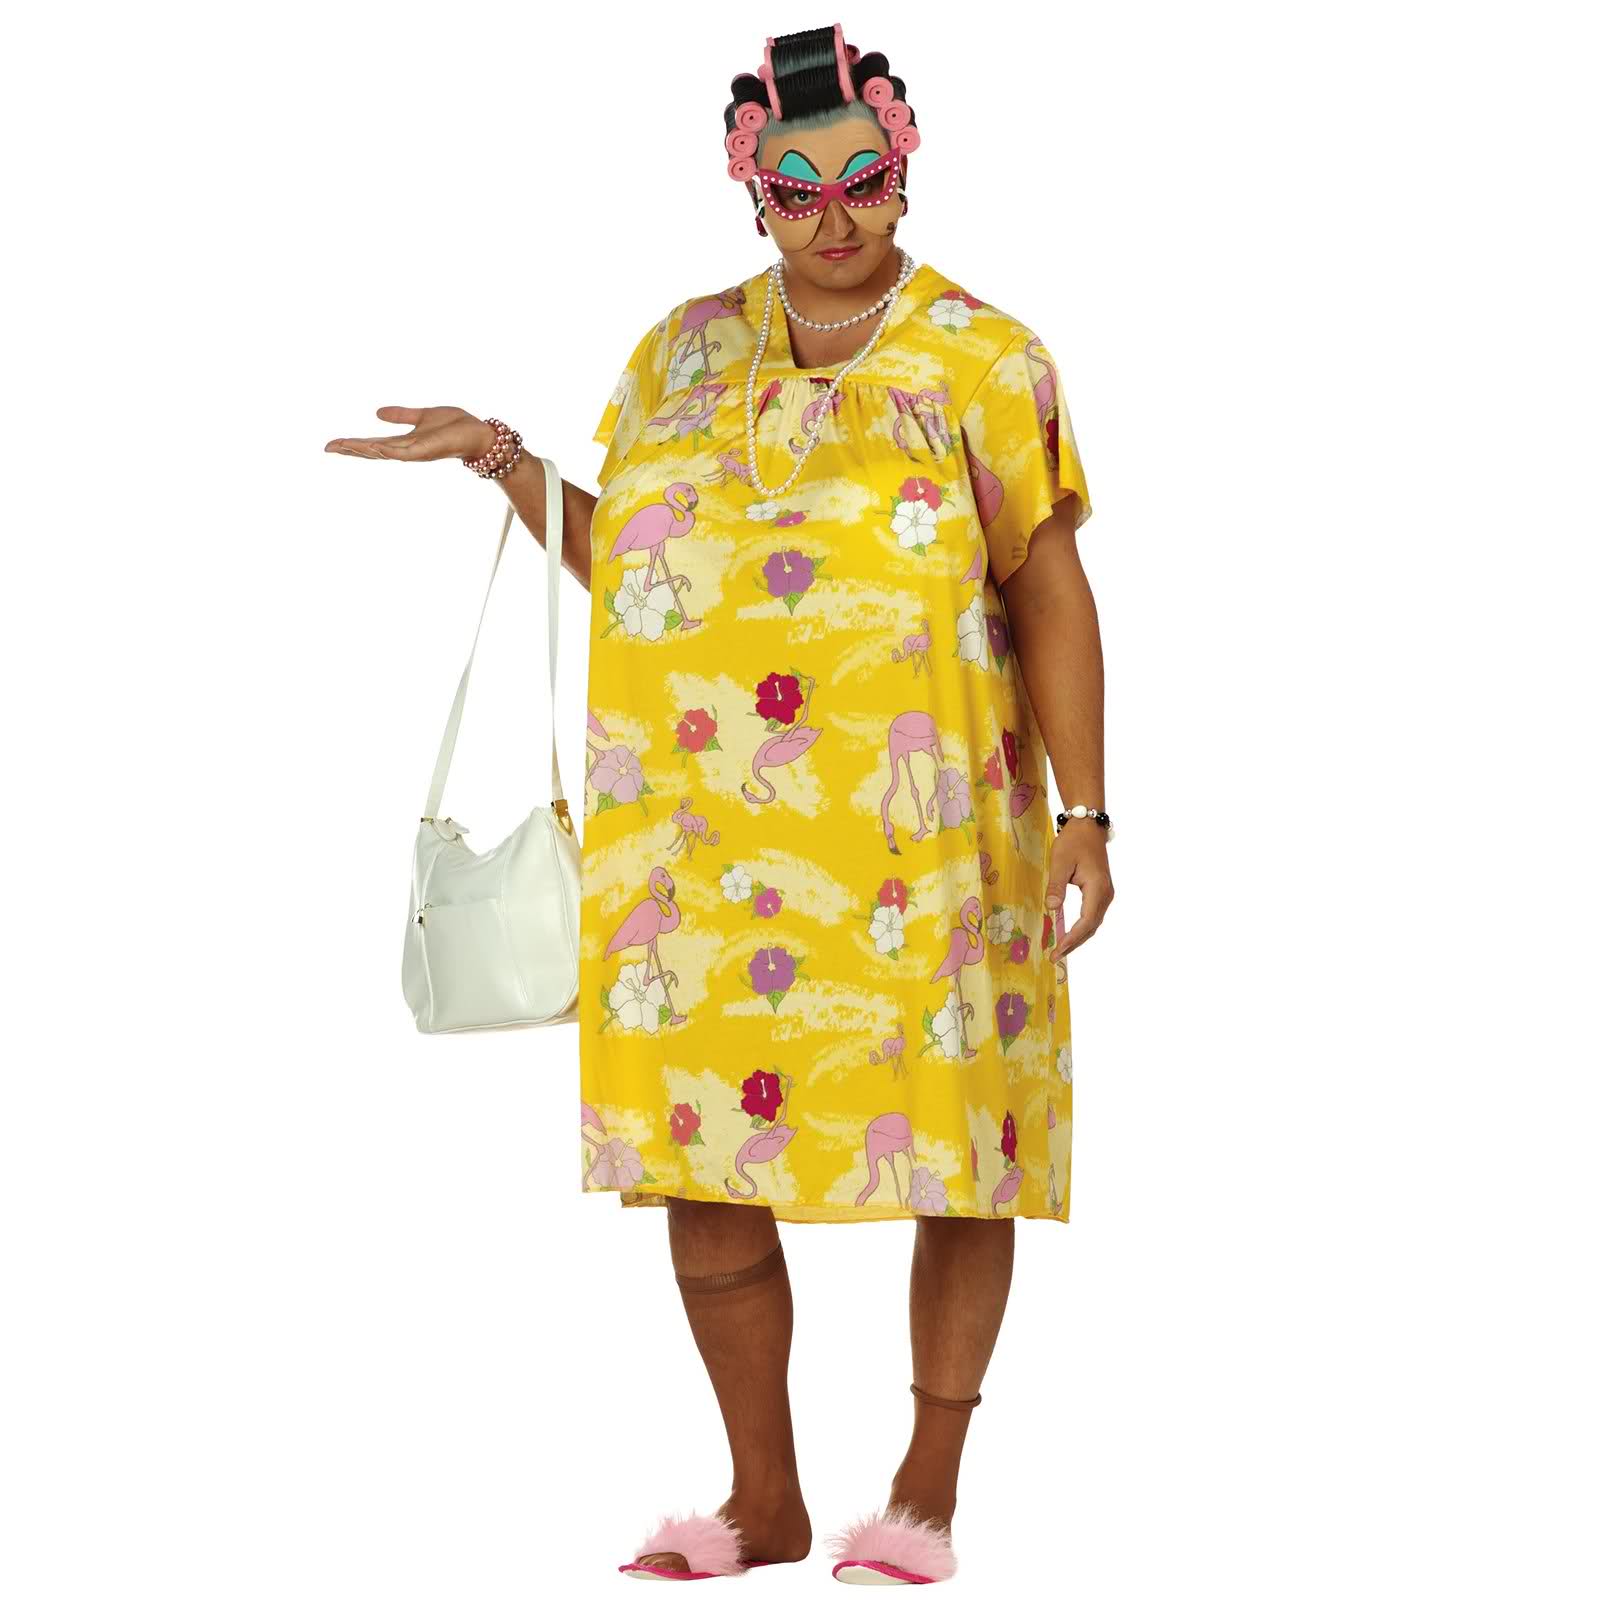 Woman With Funny Costume